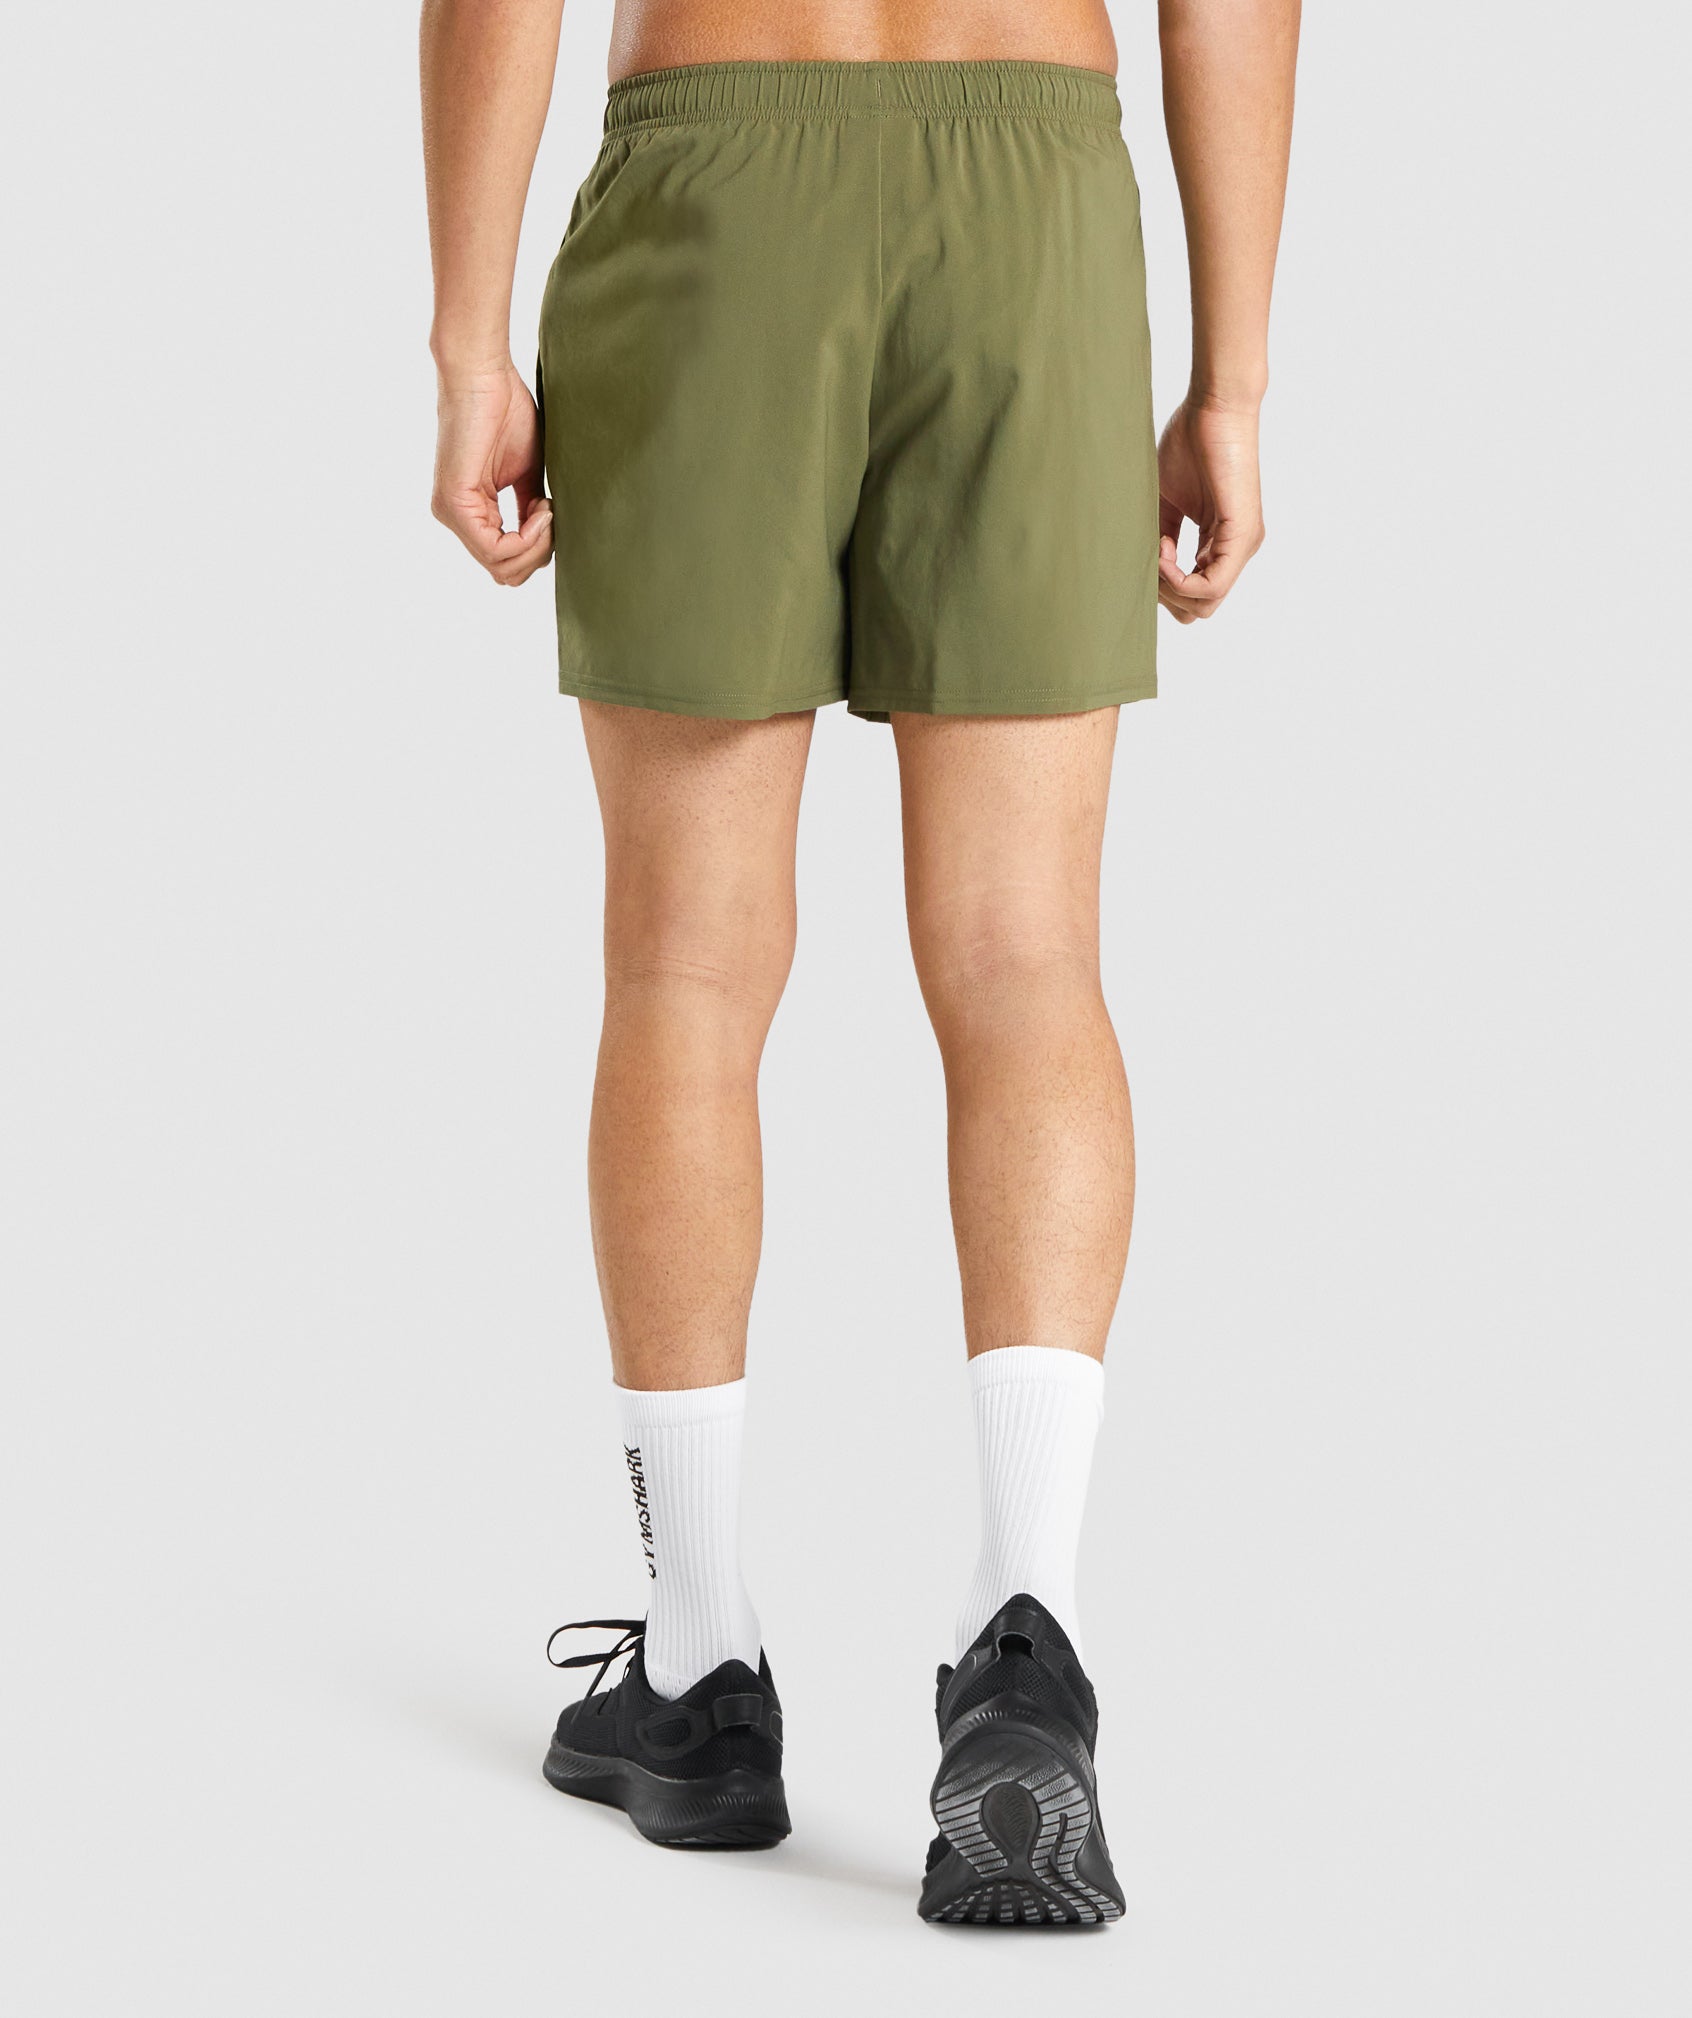 Arrival 5" Shorts in Dark Green - view 2